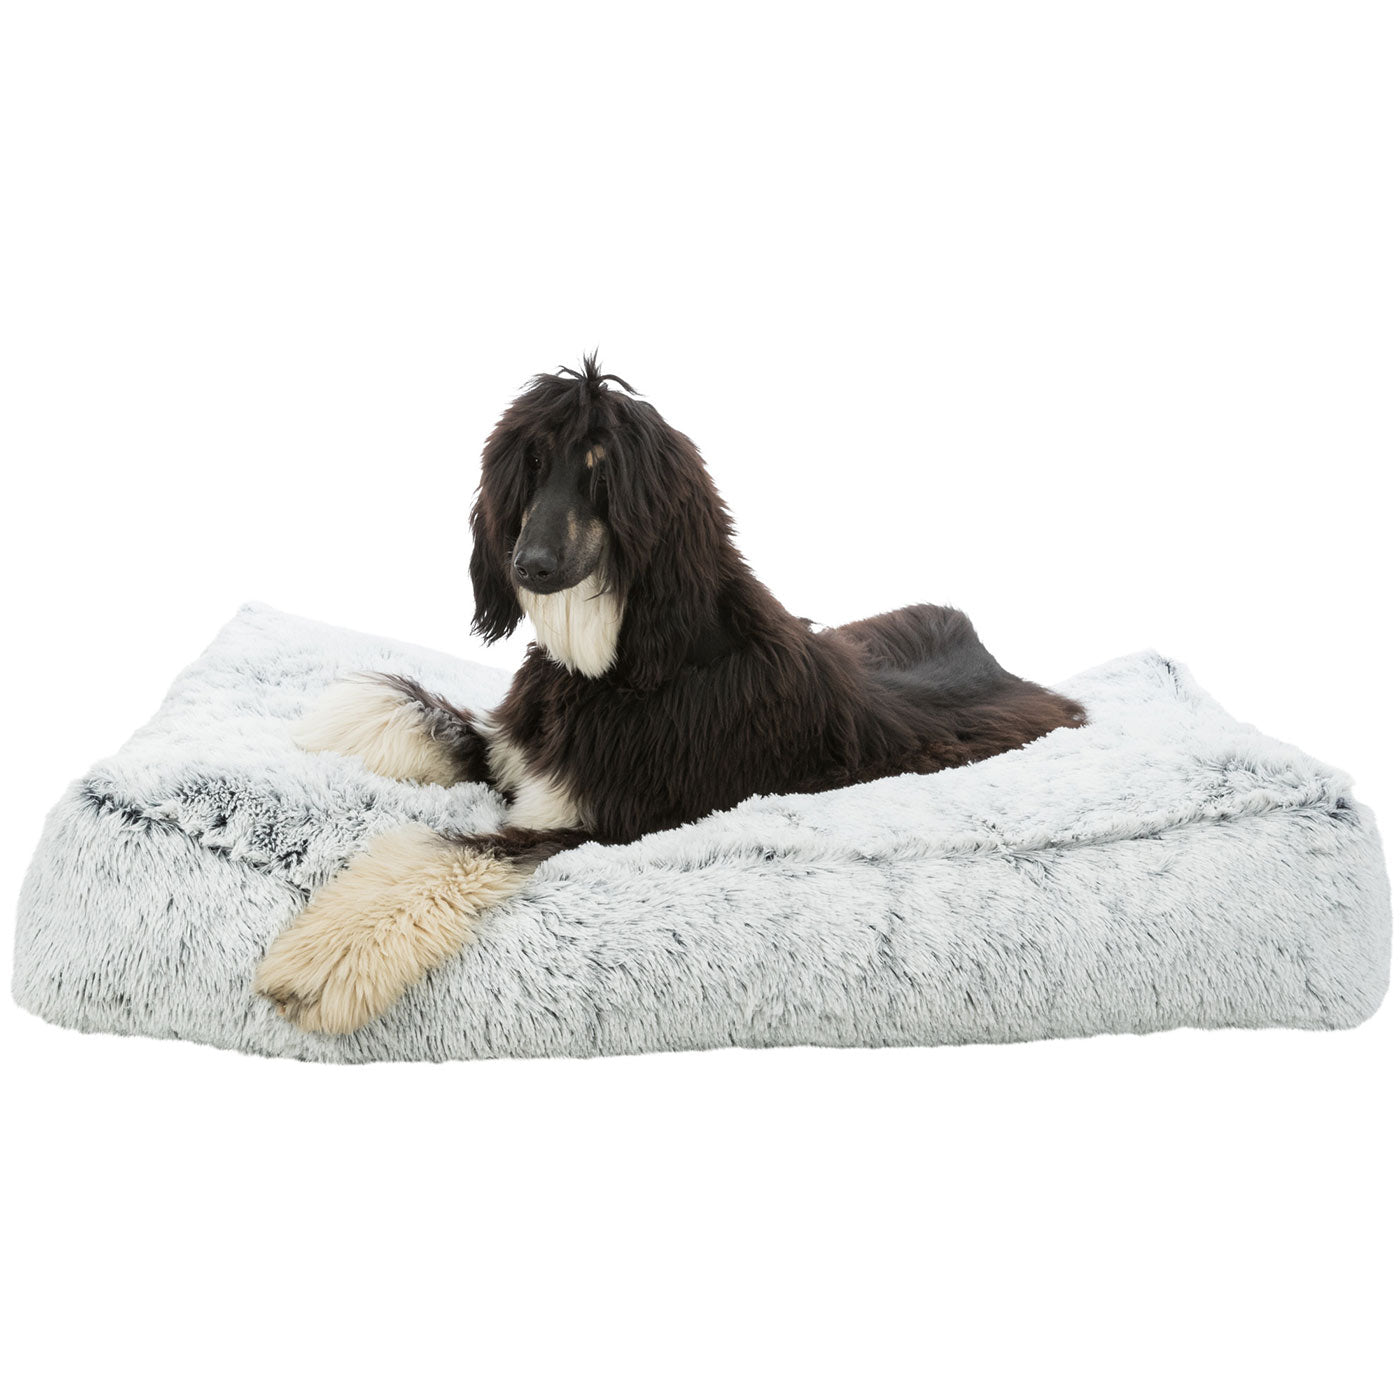 Discover Trixie Harvey Dog Cushion, in Grey. Features a Super soft, long-haired plush, Extra comfort from the voluminous filling, Removable cover for cleaning, Non-slip base. Available in three sizes at Lords and Labradors